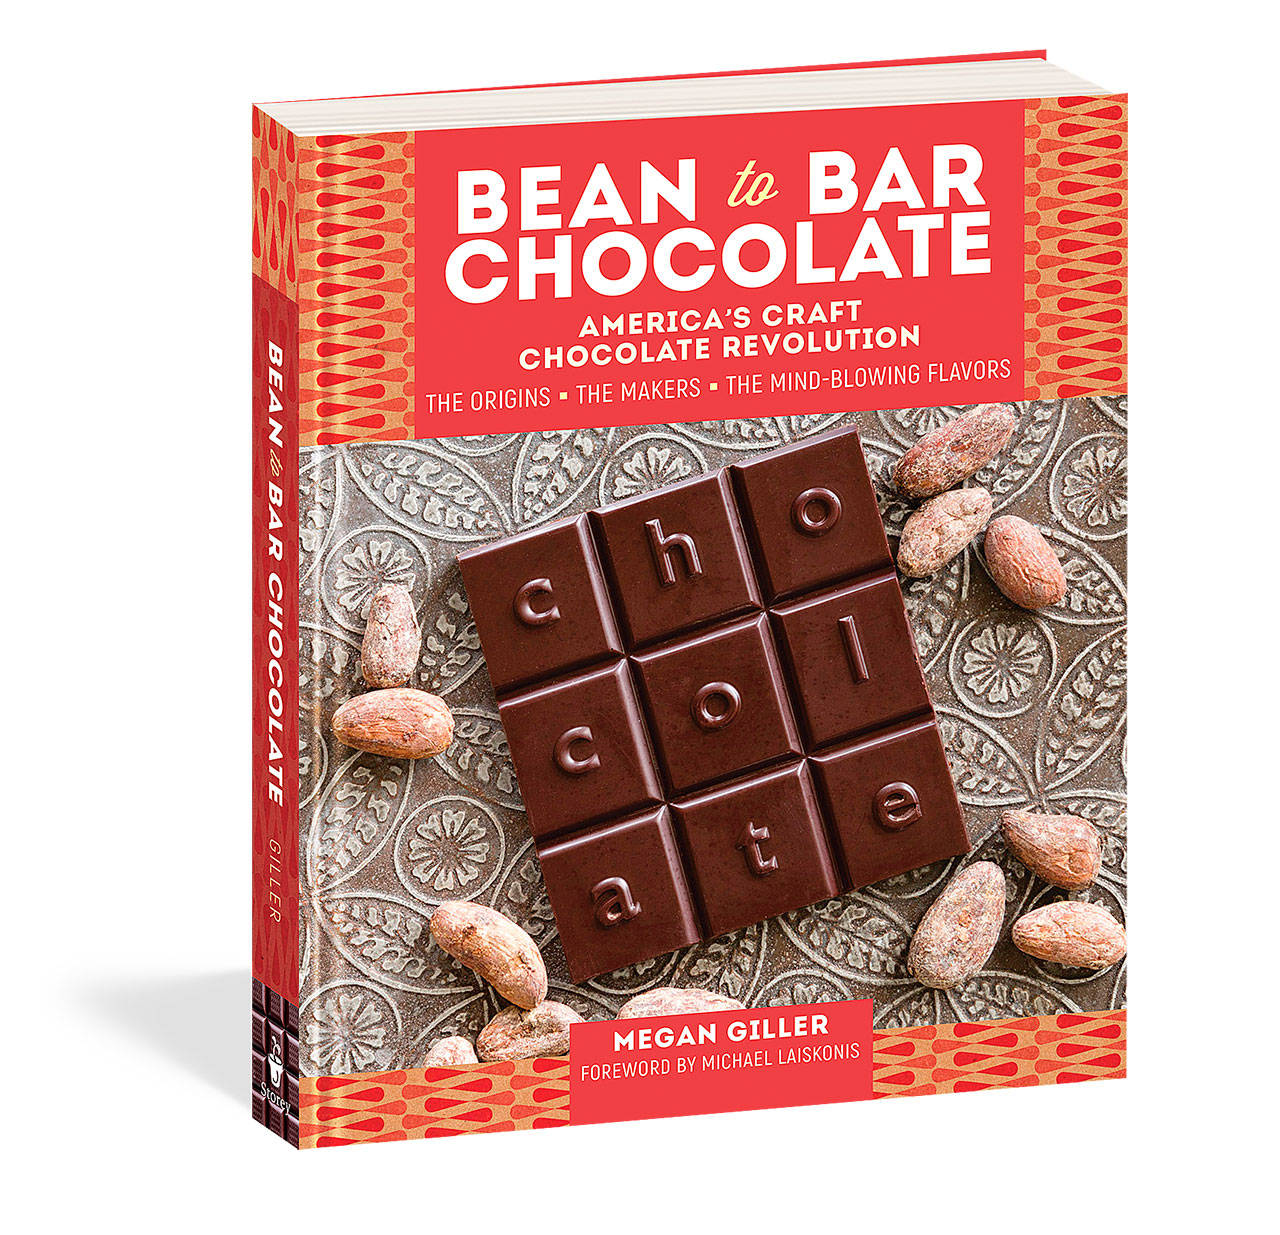 “Bean to Bar: America’s Craft Chocolate Revolution” by Megan Giller presents the basics on chocolate as well as recipes by chocolate makers and pastry chefs. (Storey Publishing)